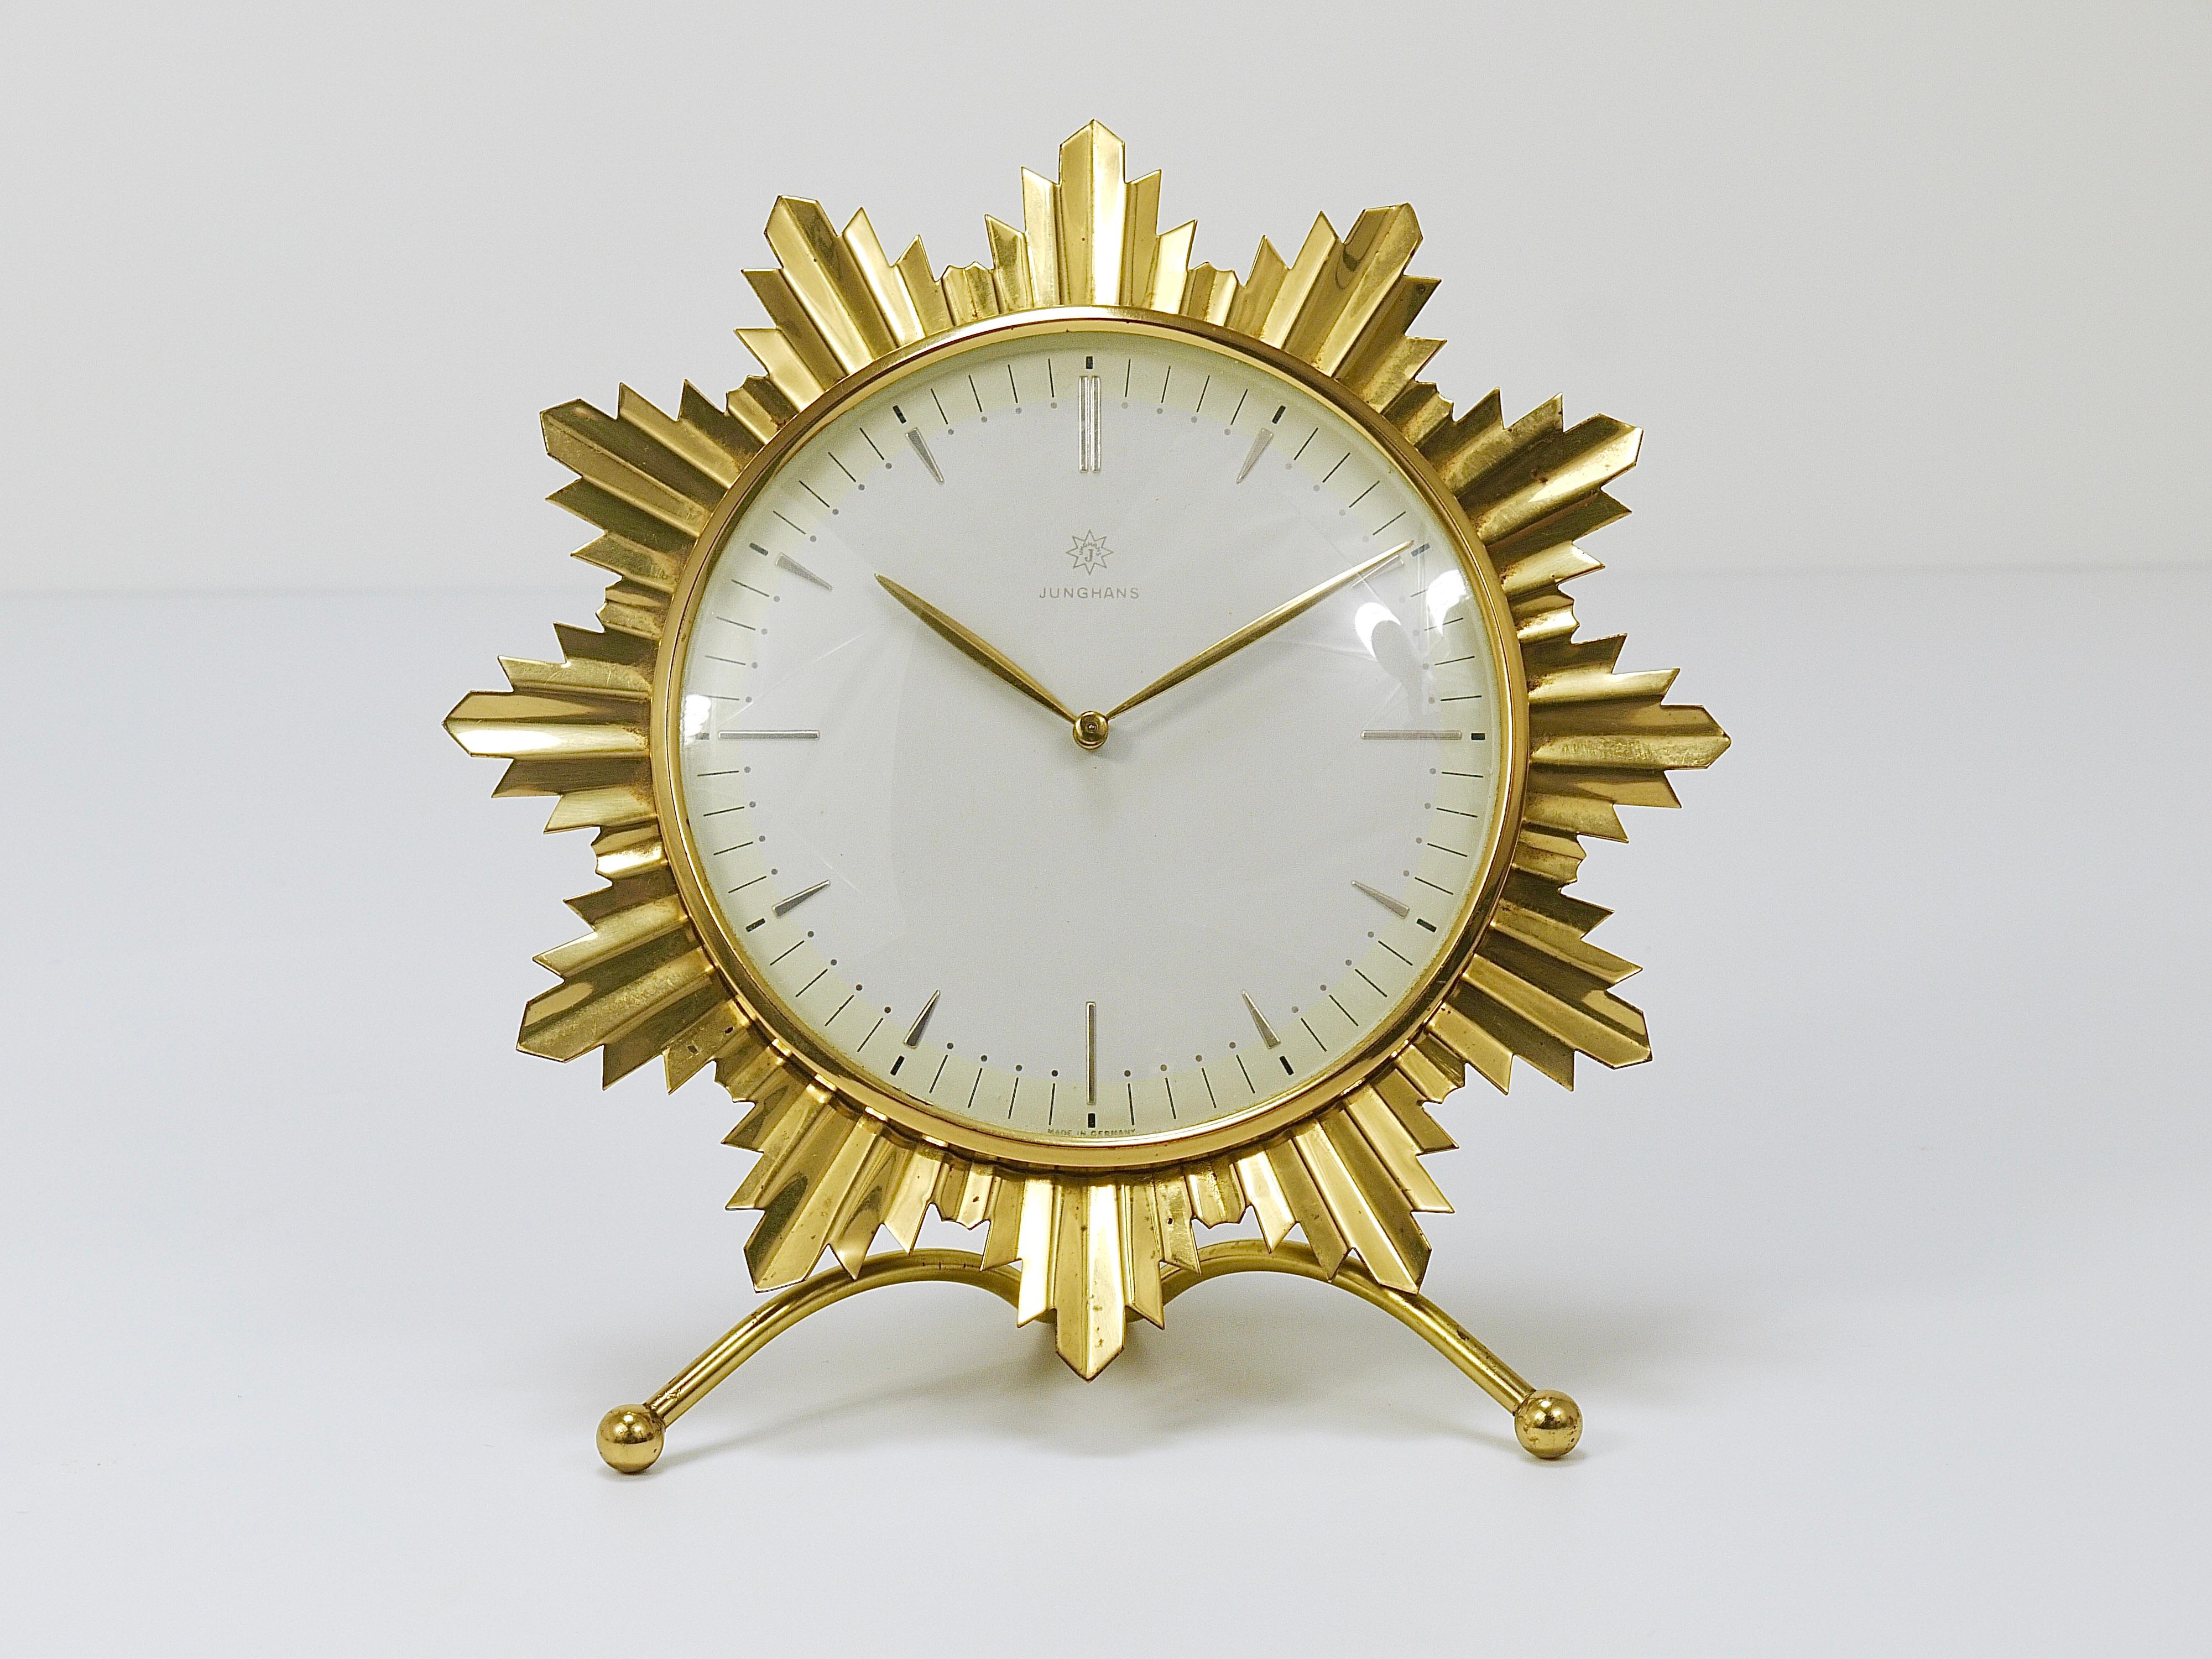 A wonderful Atomic Starburst Hollywood Regency table or desk clock from the 1950s, executed by Junghans Germany. The clock has a beautiful withe and pastel yellow clocks face with golden hands and indices and a nice sunburst brass frame. The clock